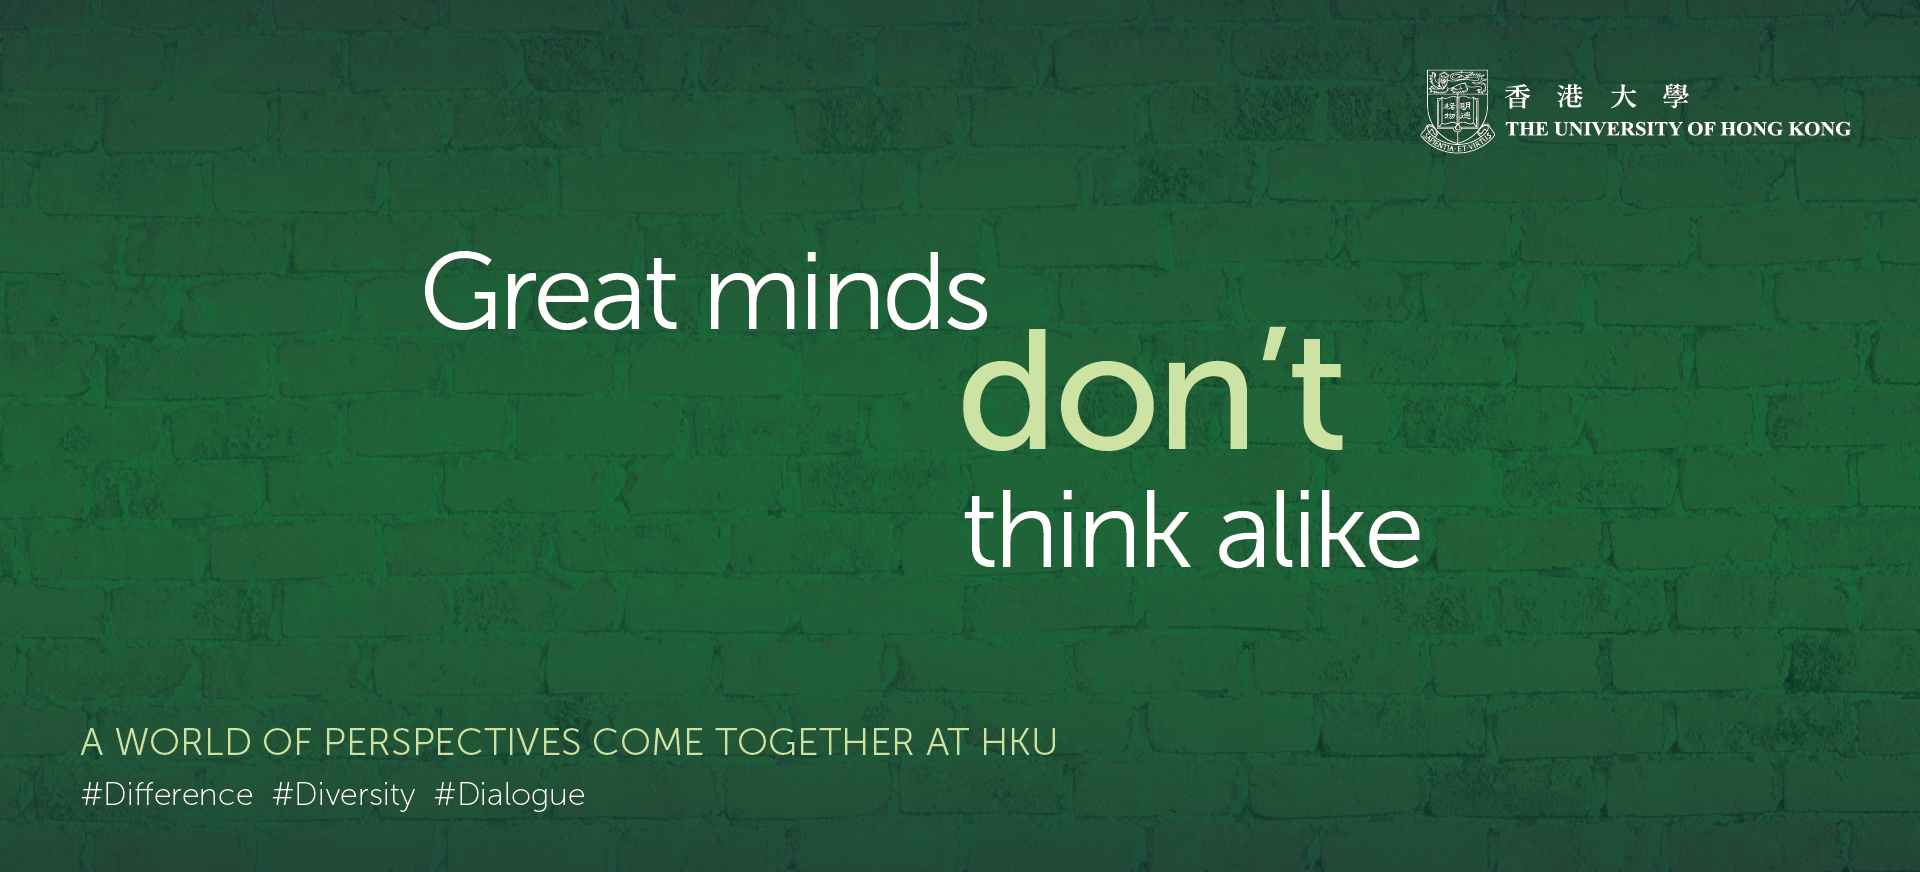 A World of Perspectives Come Together at HKU - Great minds..